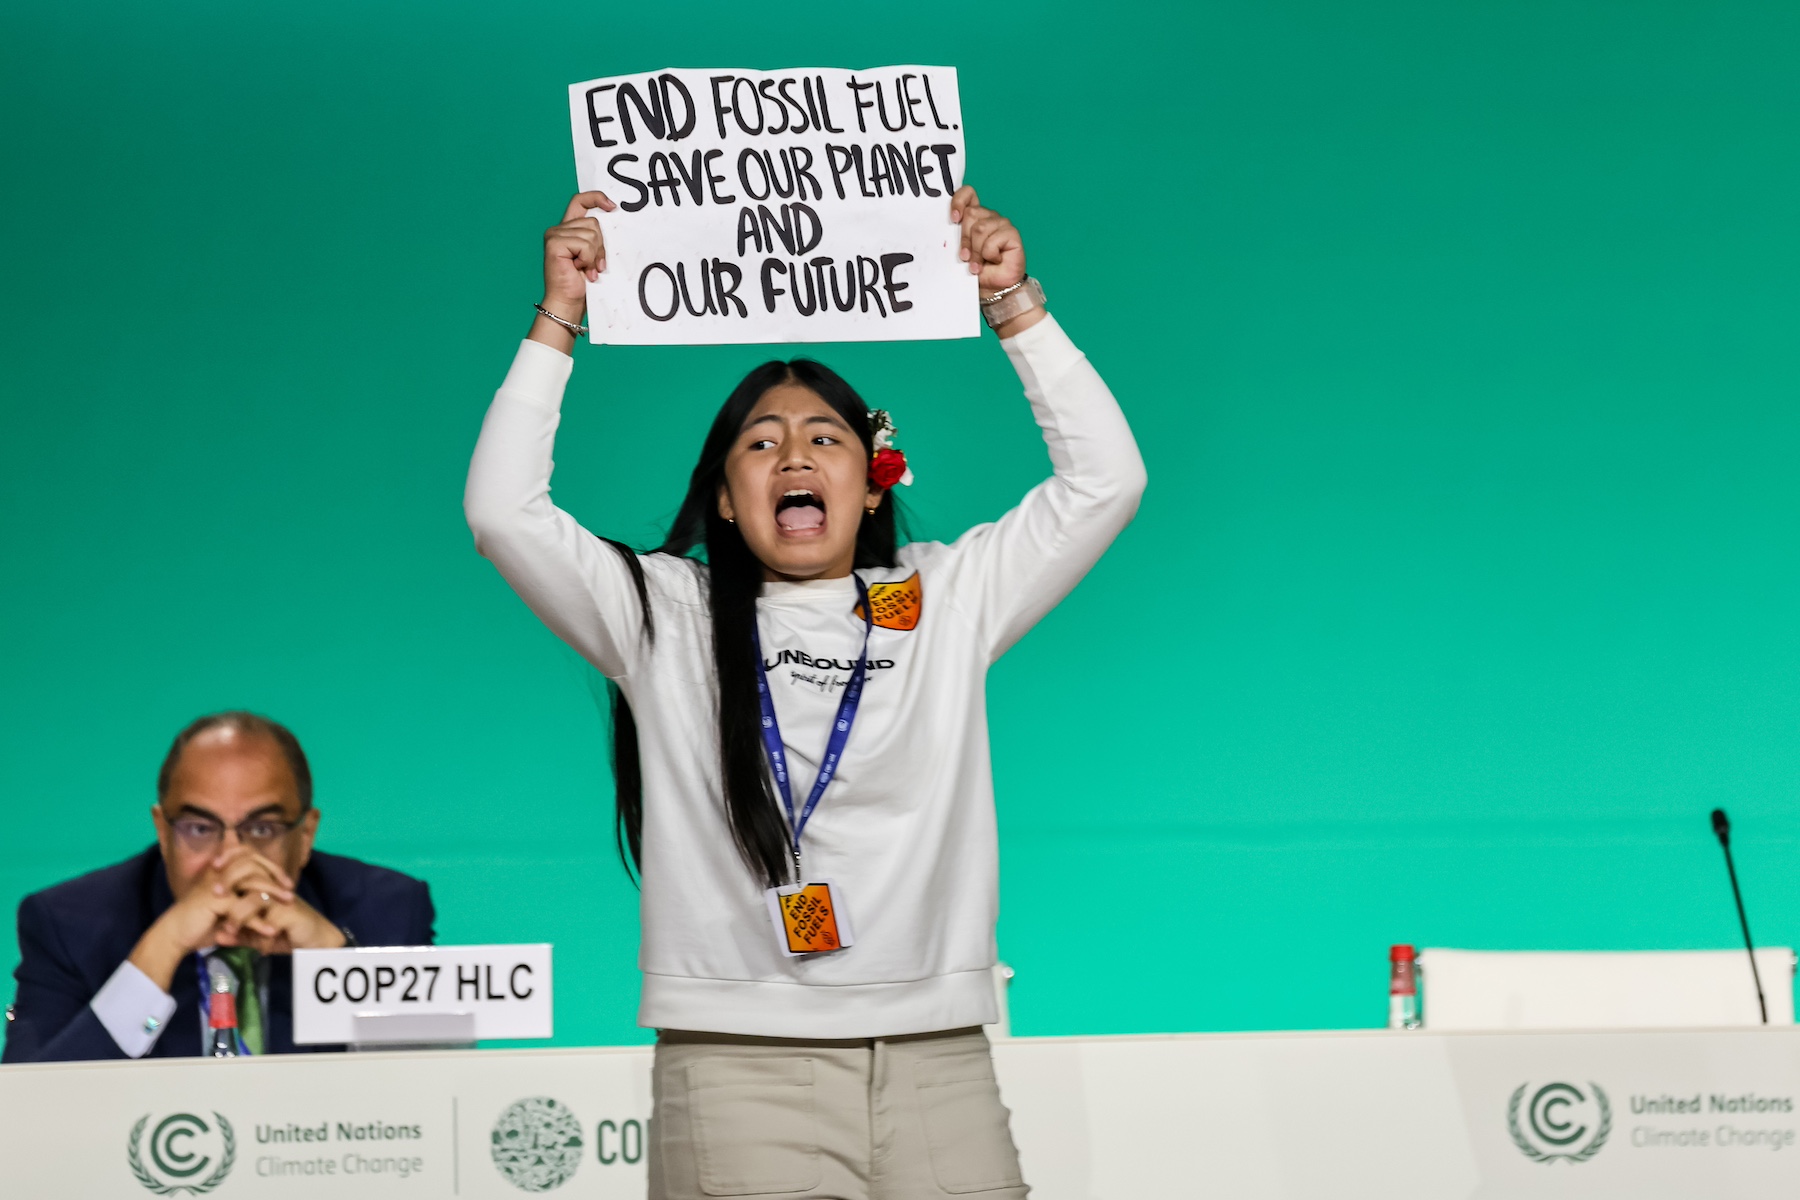 Licypriya Kangujam force herself-onto the stage in a protest against fossil fuels cop28